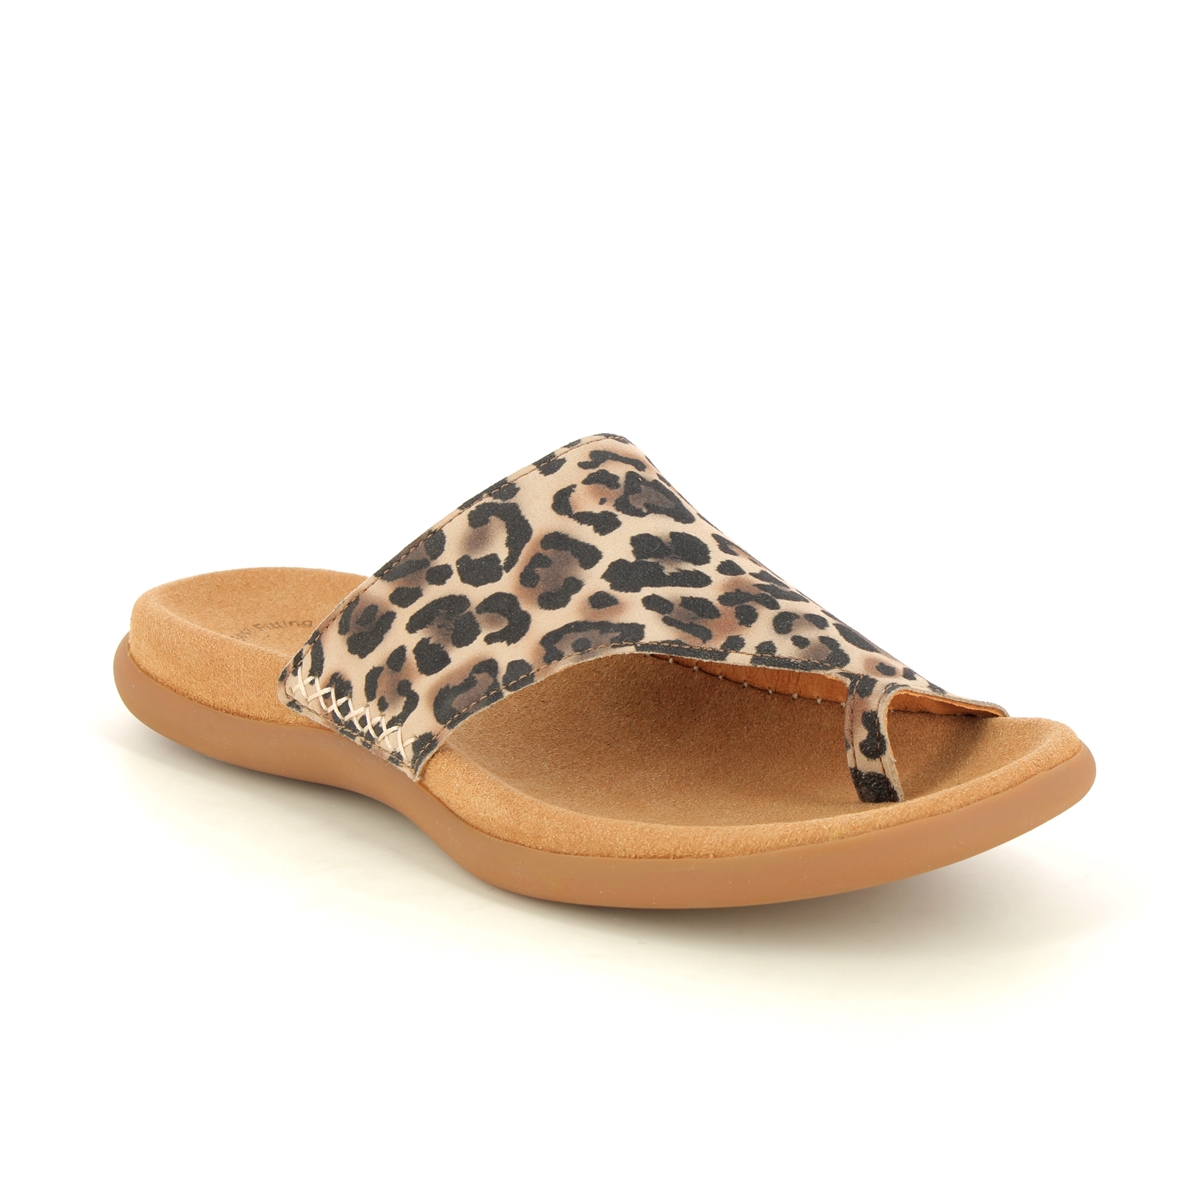 Gabor Lanzarote Leopard print Womens Toe Post Sandals 43.700.42 in a Plain Leather in Size 38